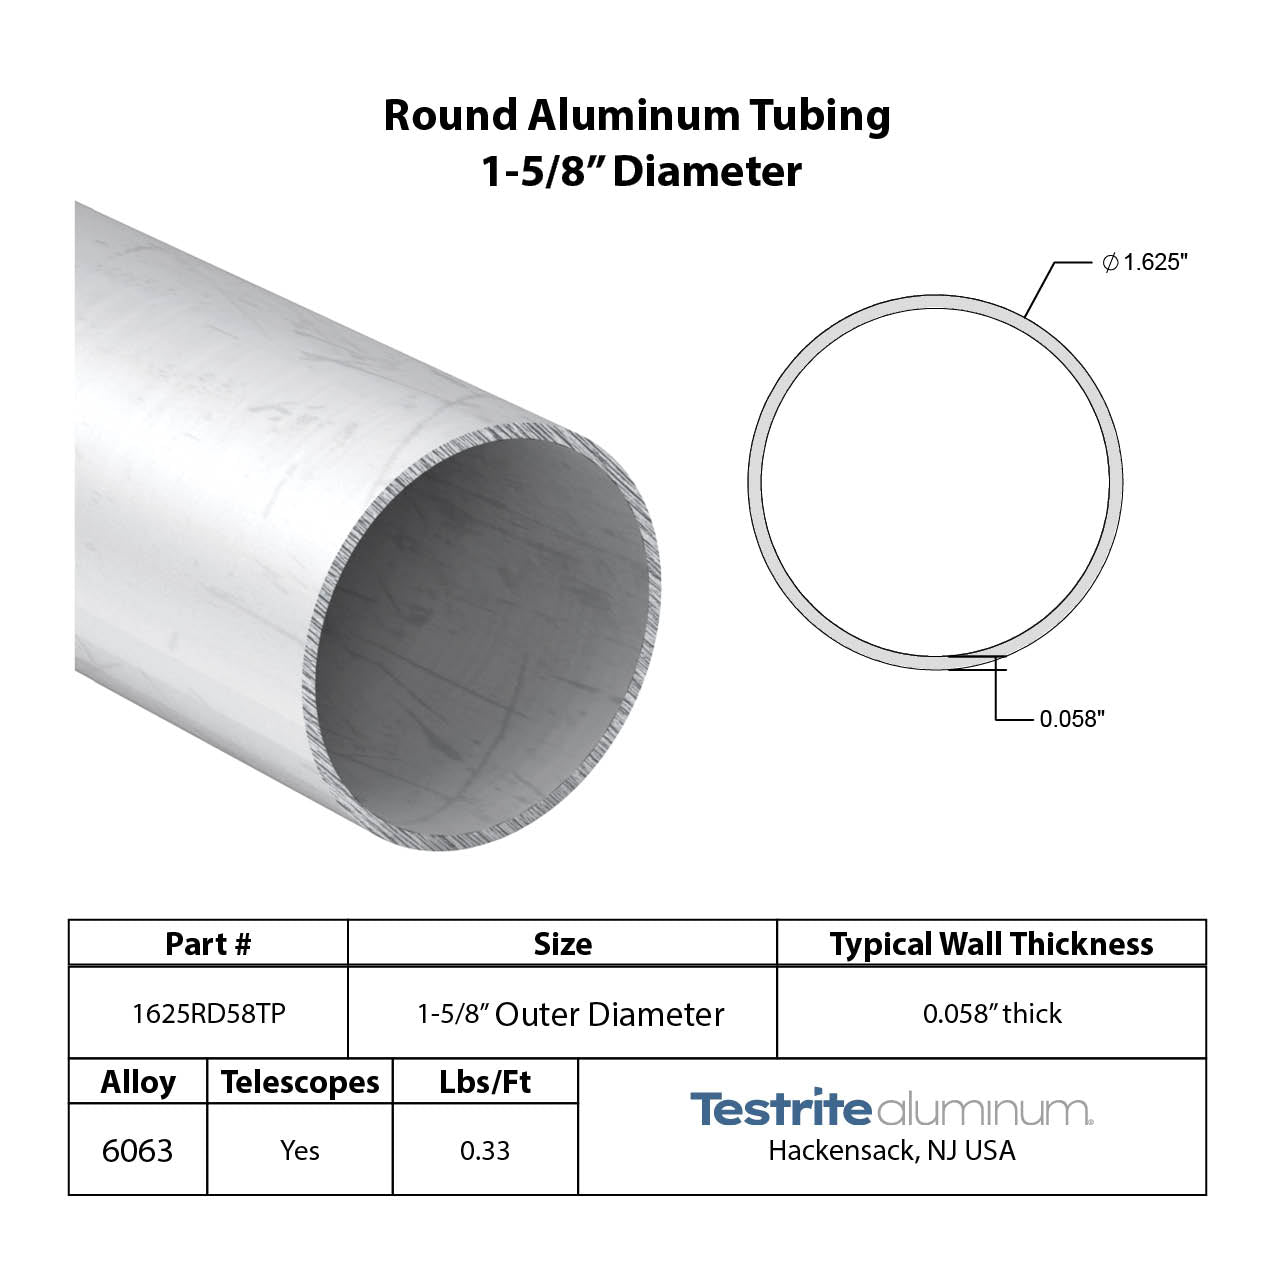 Specifications for 1-5/8" OD x .058" Wall Drawn Round Aluminum Tubing Telescopic, 1.625" OD x .058" wall round aluminum tube,, designed to fit inside our 1-7/8" OD x .058" wall tube and to accept our 1-5/8" OD x .058" Wall tube inside of it, all telescoping compatible